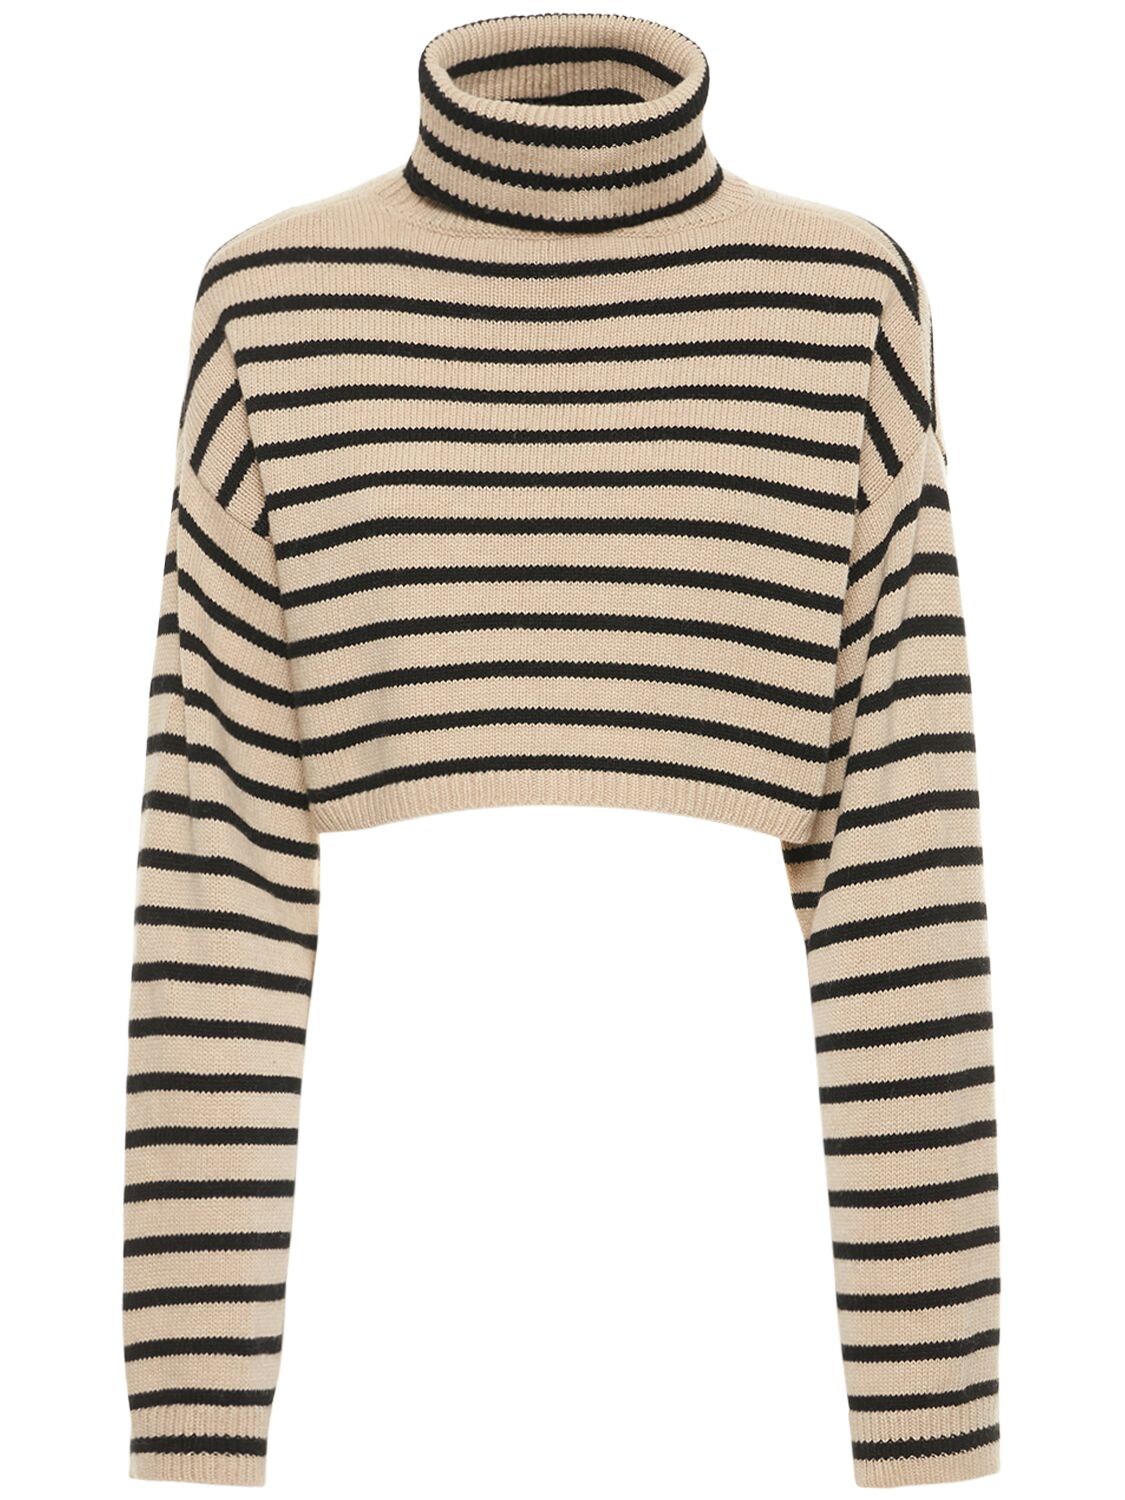 The Frankie Shop Athina Cropped Wool Blend Sweater In Beige,black ...